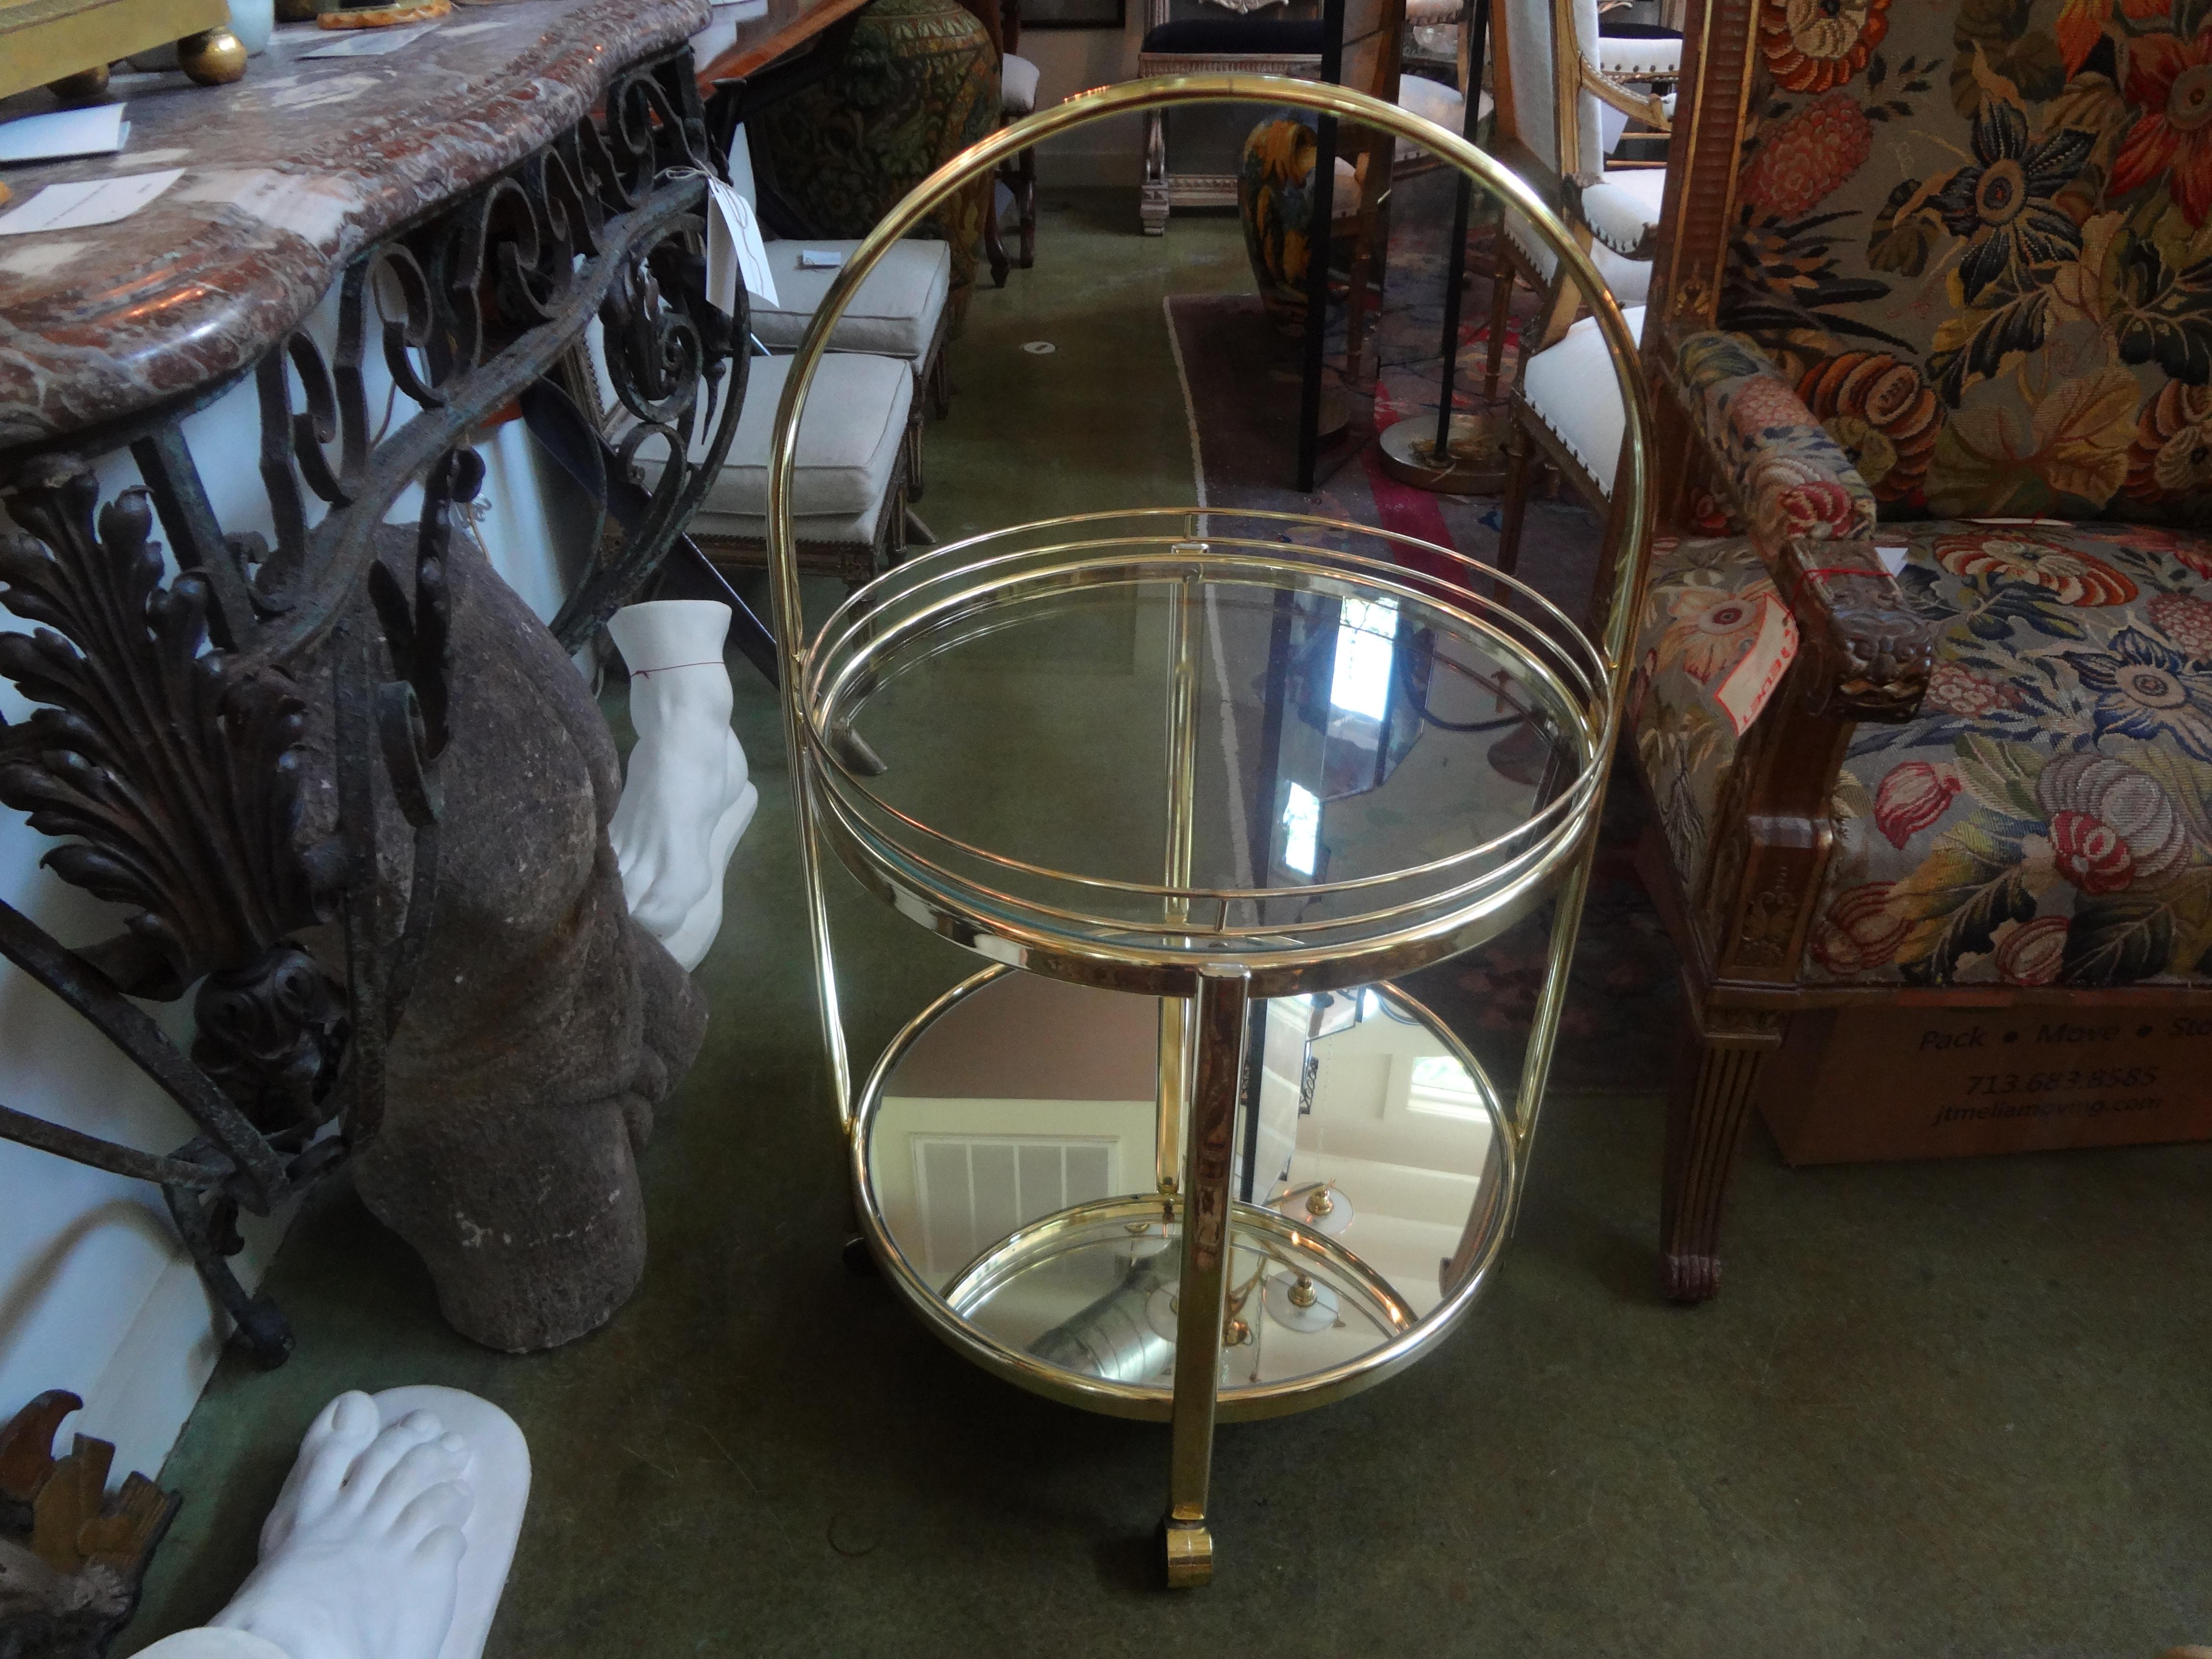 Milo Baughman style brass bar cart.
Interesting Milo Baughman inspired brass bar cart, drinks cart or drinks trolley. This great mid-century circular brass bar cart is two-tiered. The top is glass and the bottom is mirrored. This possibly Italian